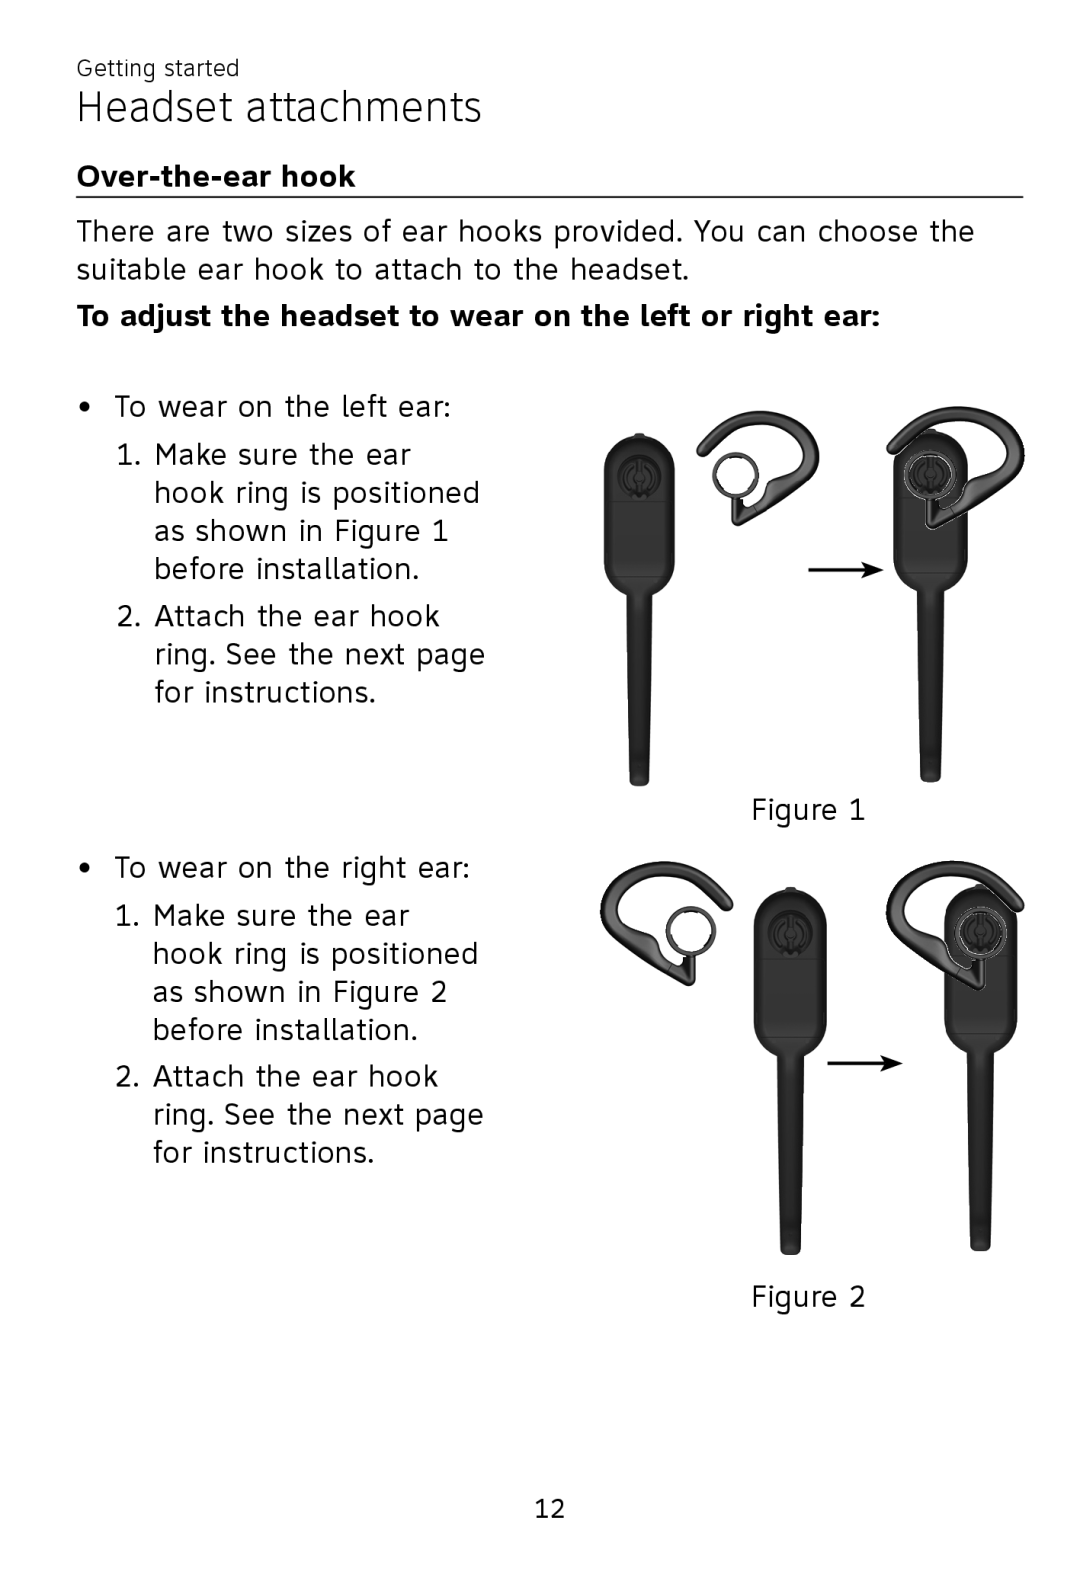 AT&T TL7700 user manual Over-the-earhook, Headset attachments 